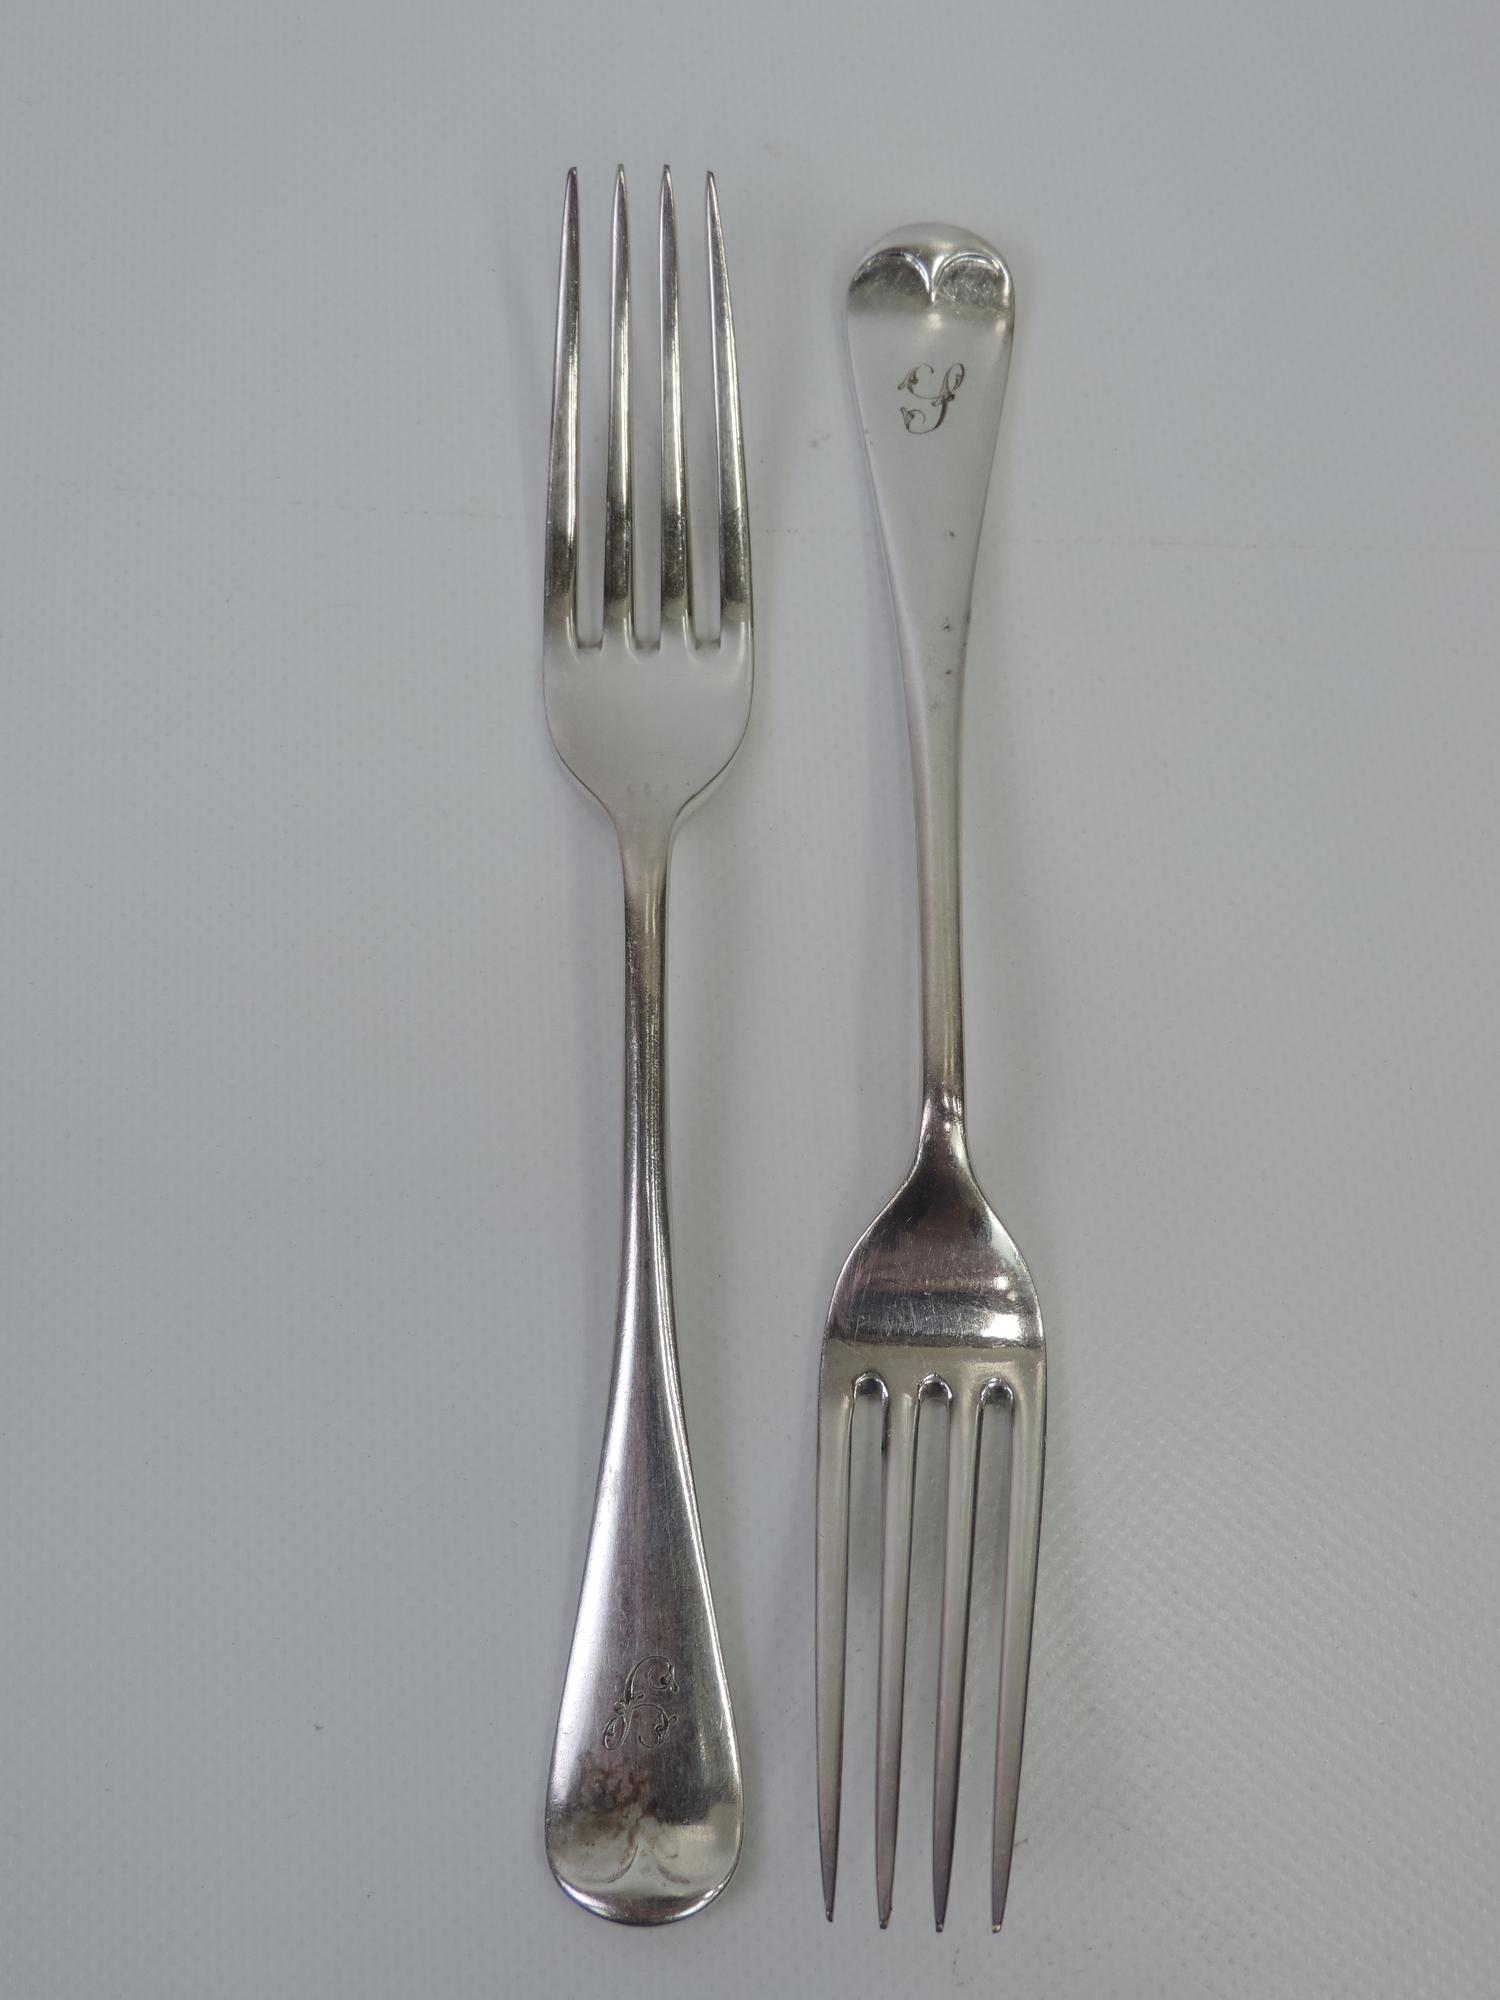 Set of 6x Walker and Hall Silver Plated Table Forks - Image 2 of 4